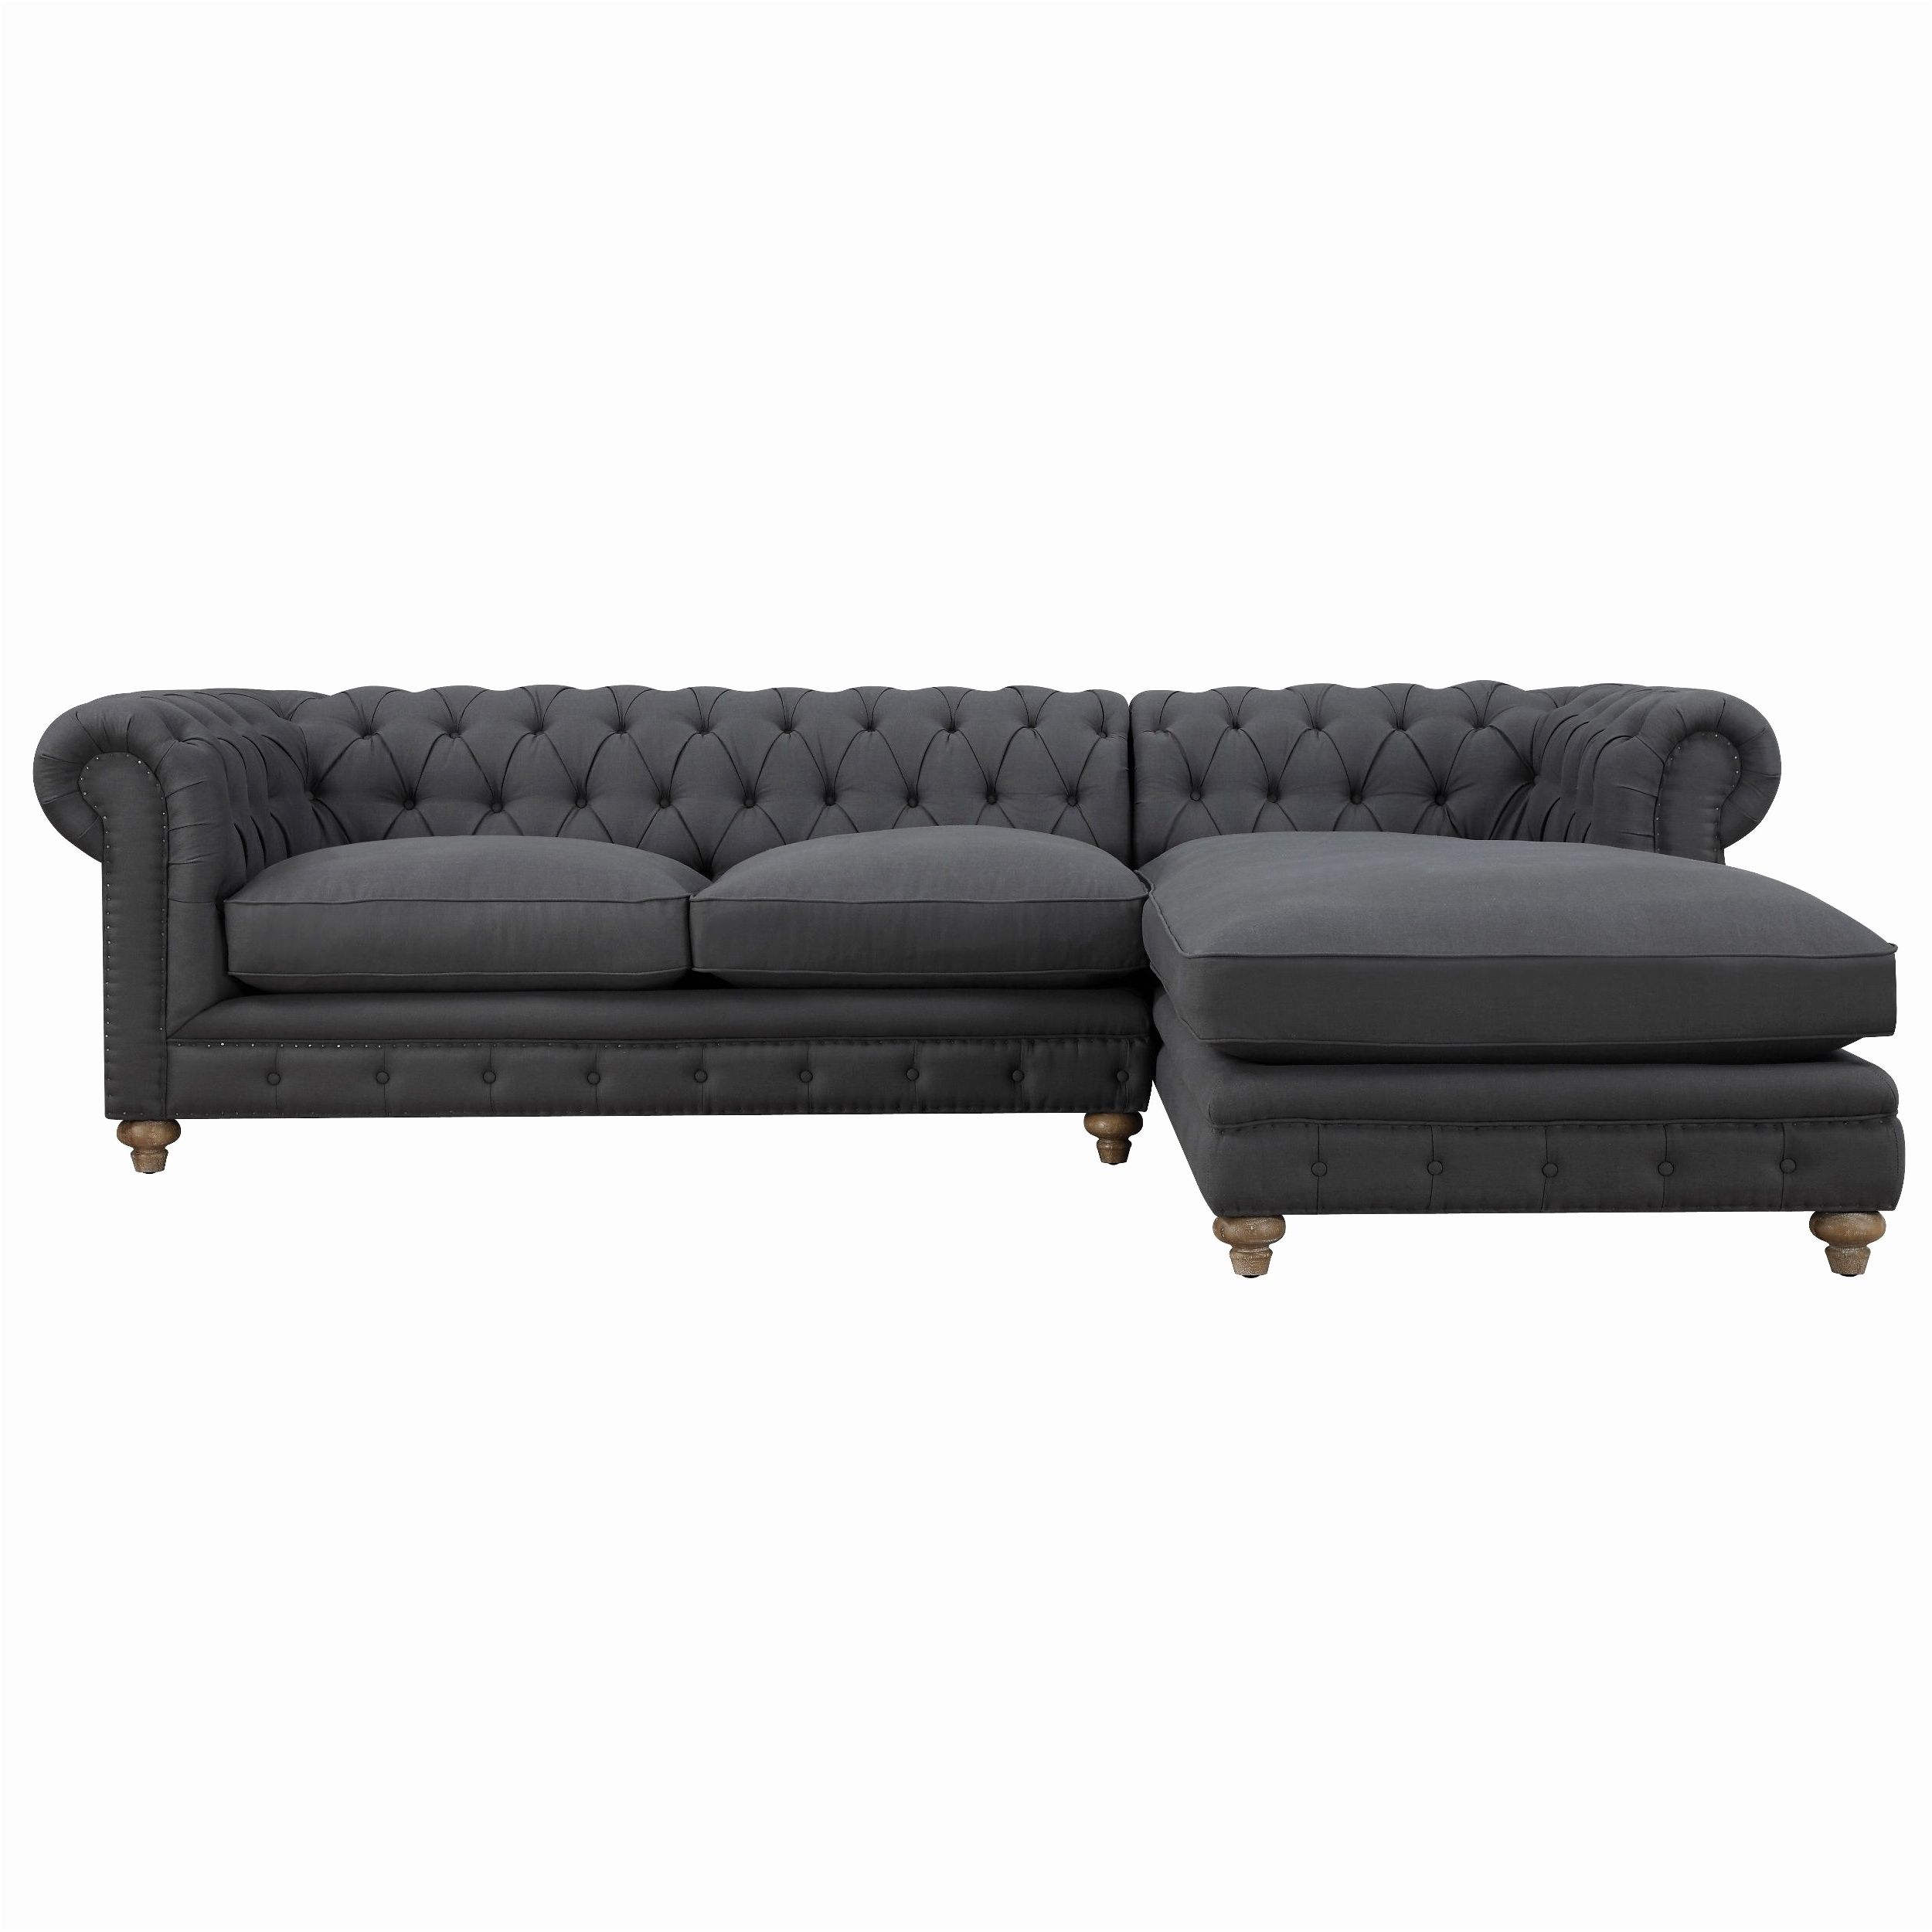 Widely Used Sectional Sofas At Sears For Fresh Sears Leather Sofa New – Intuisiblog (View 13 of 20)